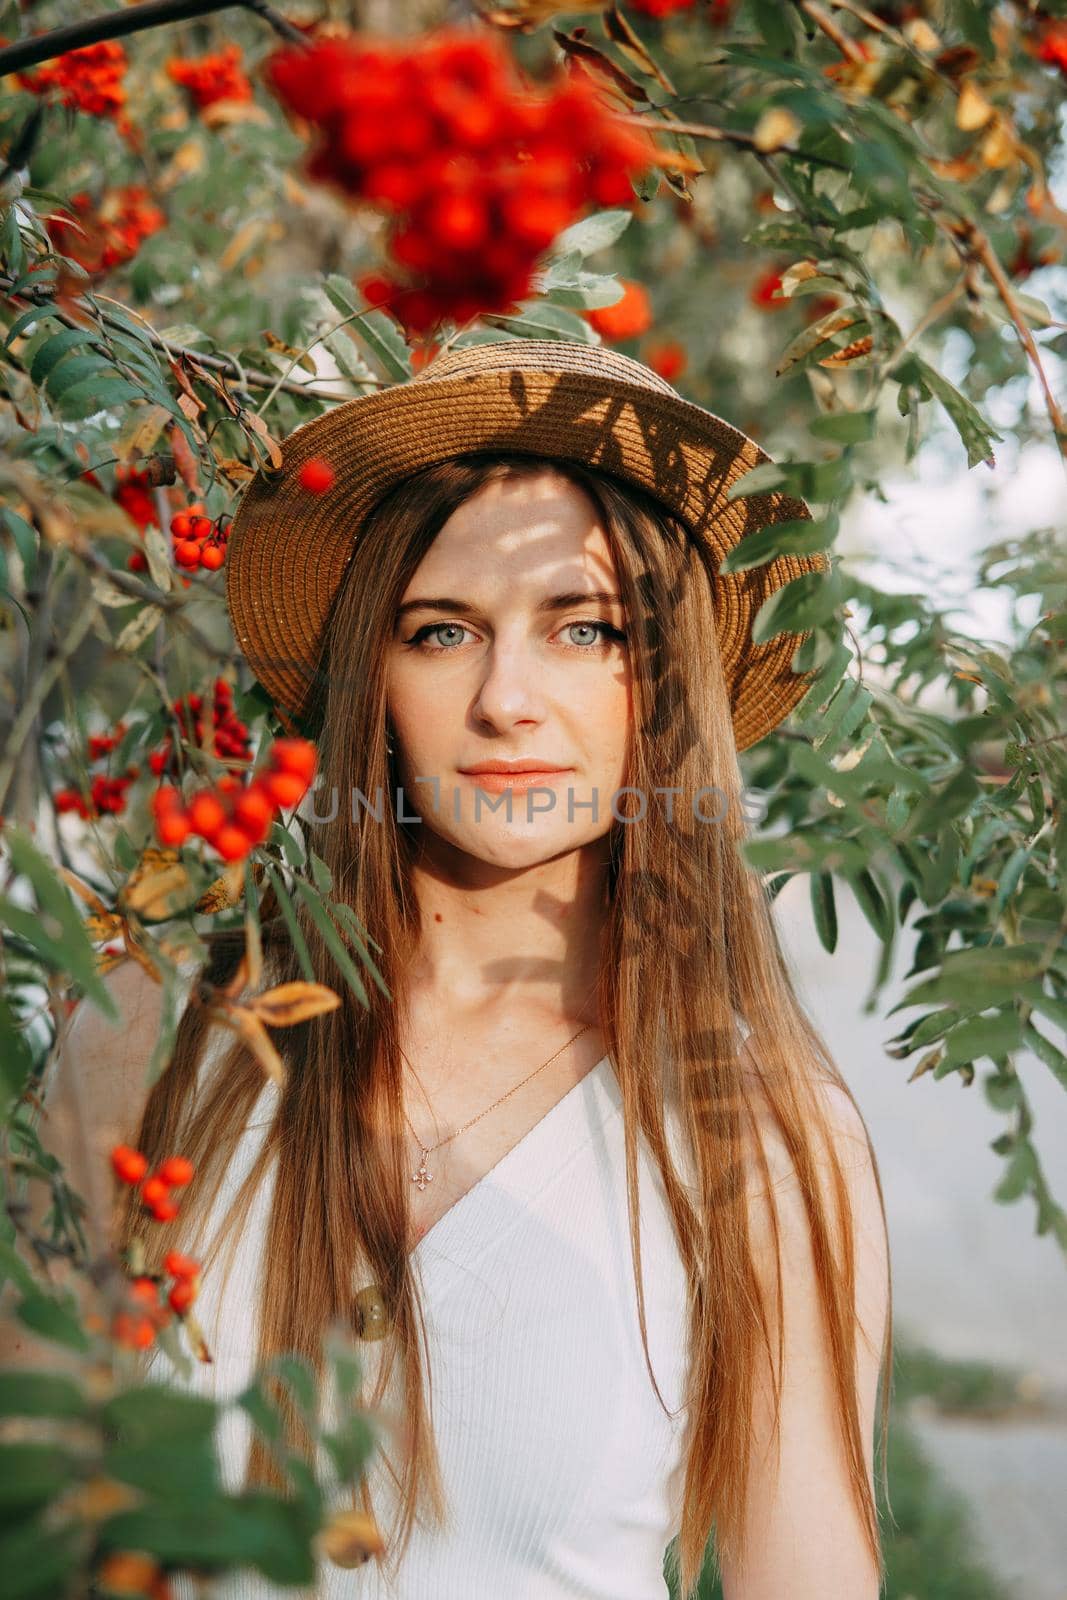 A beautiful blonde girl in a hat with long hair, on a walk in the autumn season. Portrait of a woman at a rowan tree.